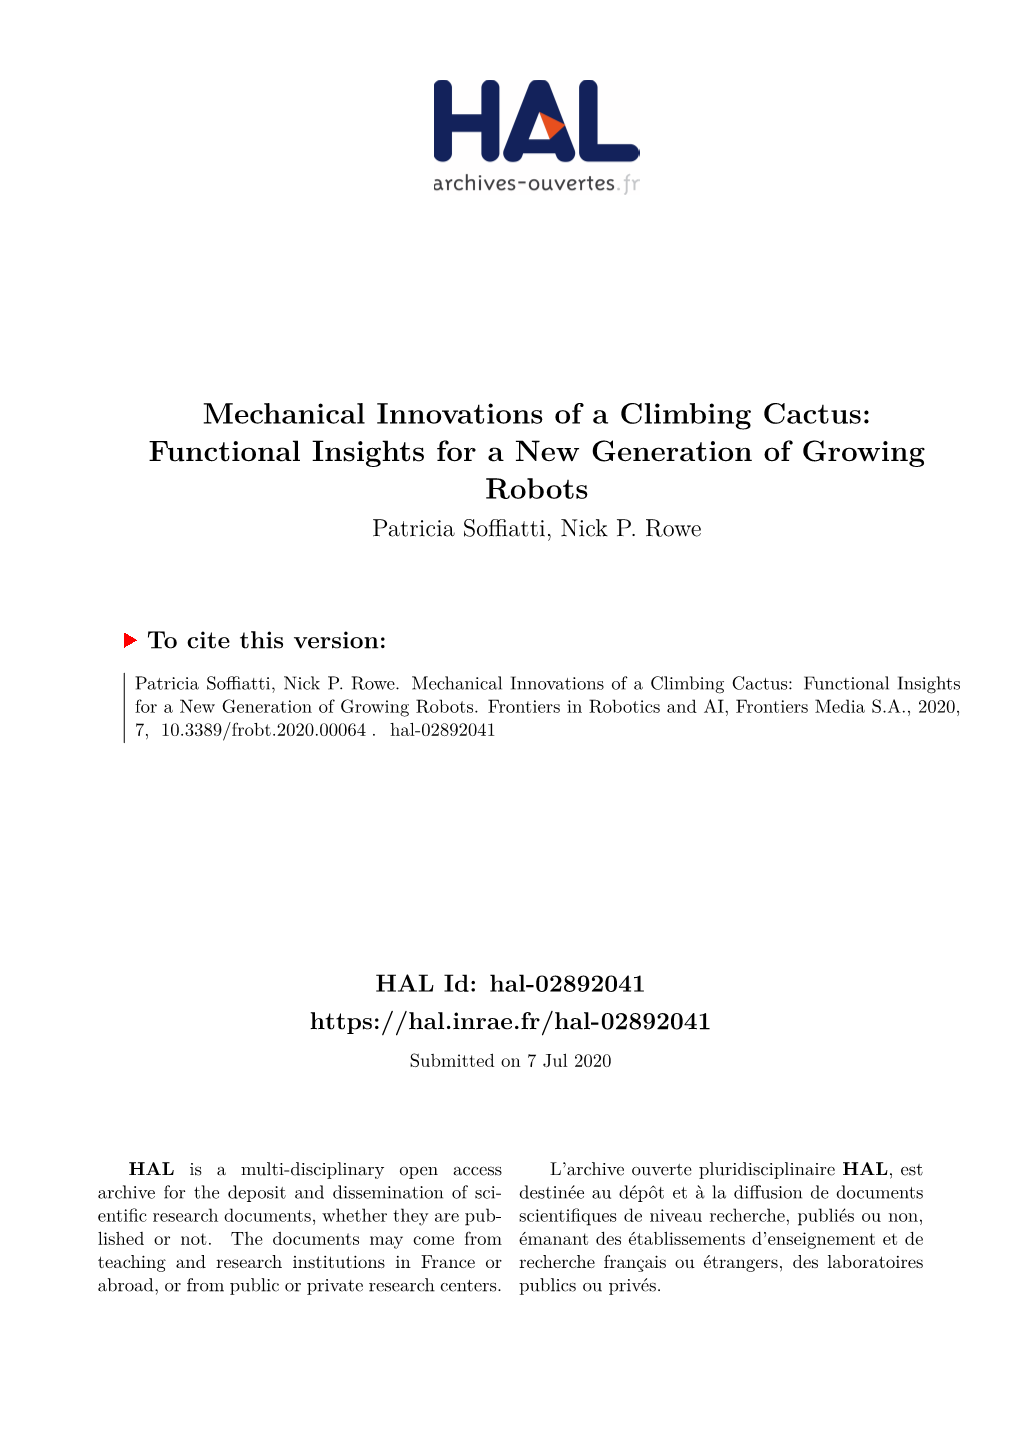 Mechanical Innovations of a Climbing Cactus: Functional Insights for a New Generation of Growing Robots Patricia Soﬀiatti, Nick P